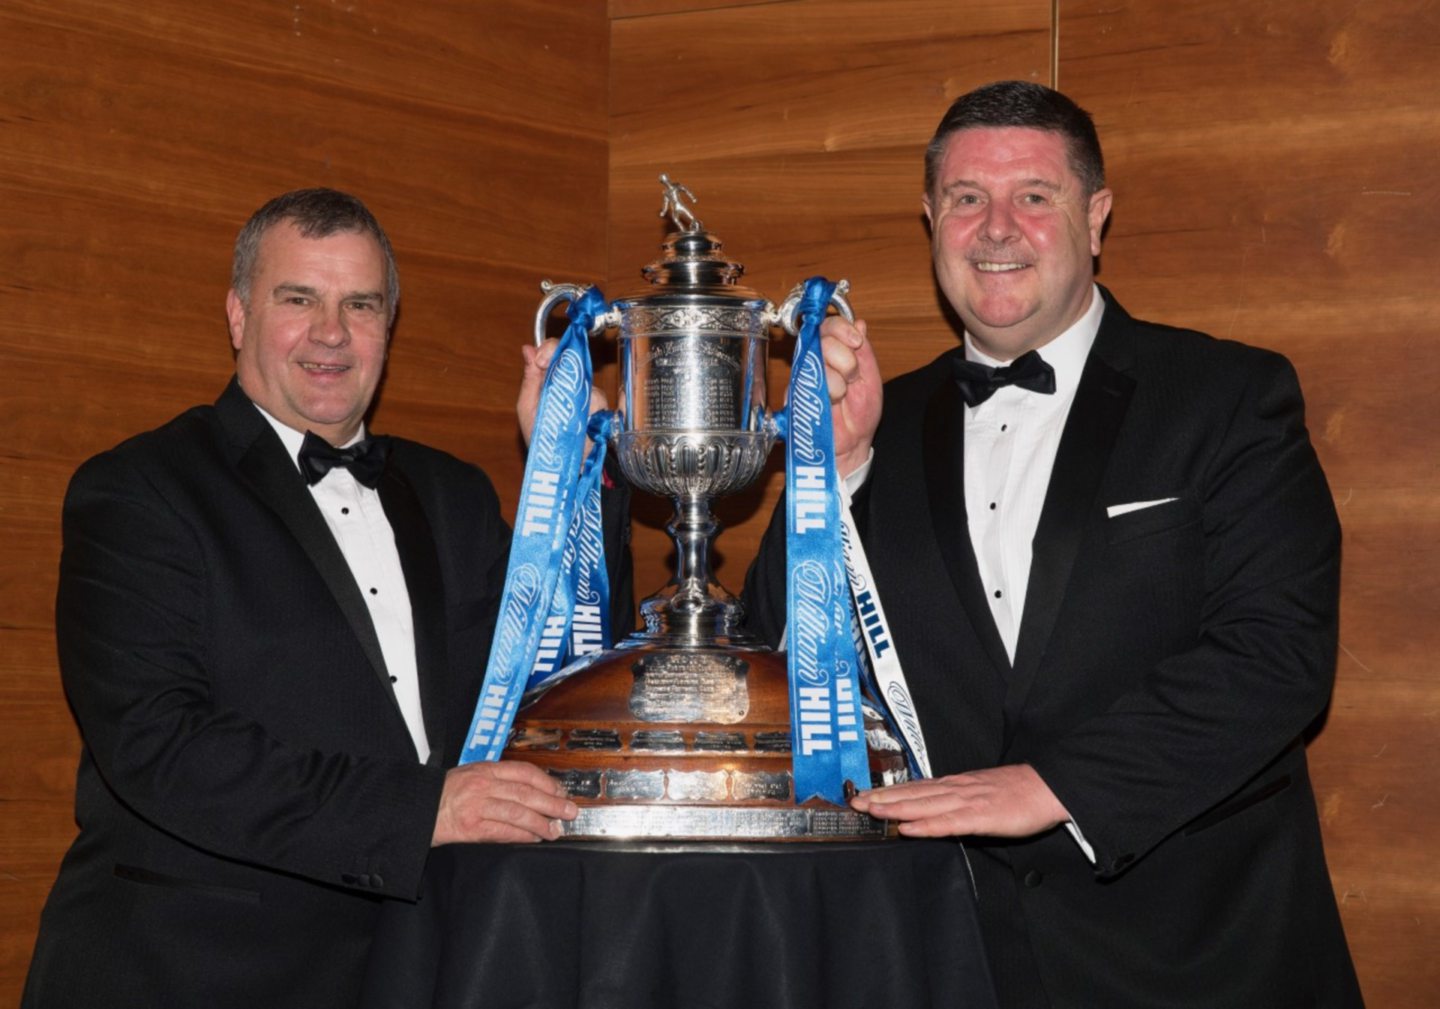 George Browning, right, and Alistair Stevenson hold up Scottish Cup after St Johnstone's victory in 2021.